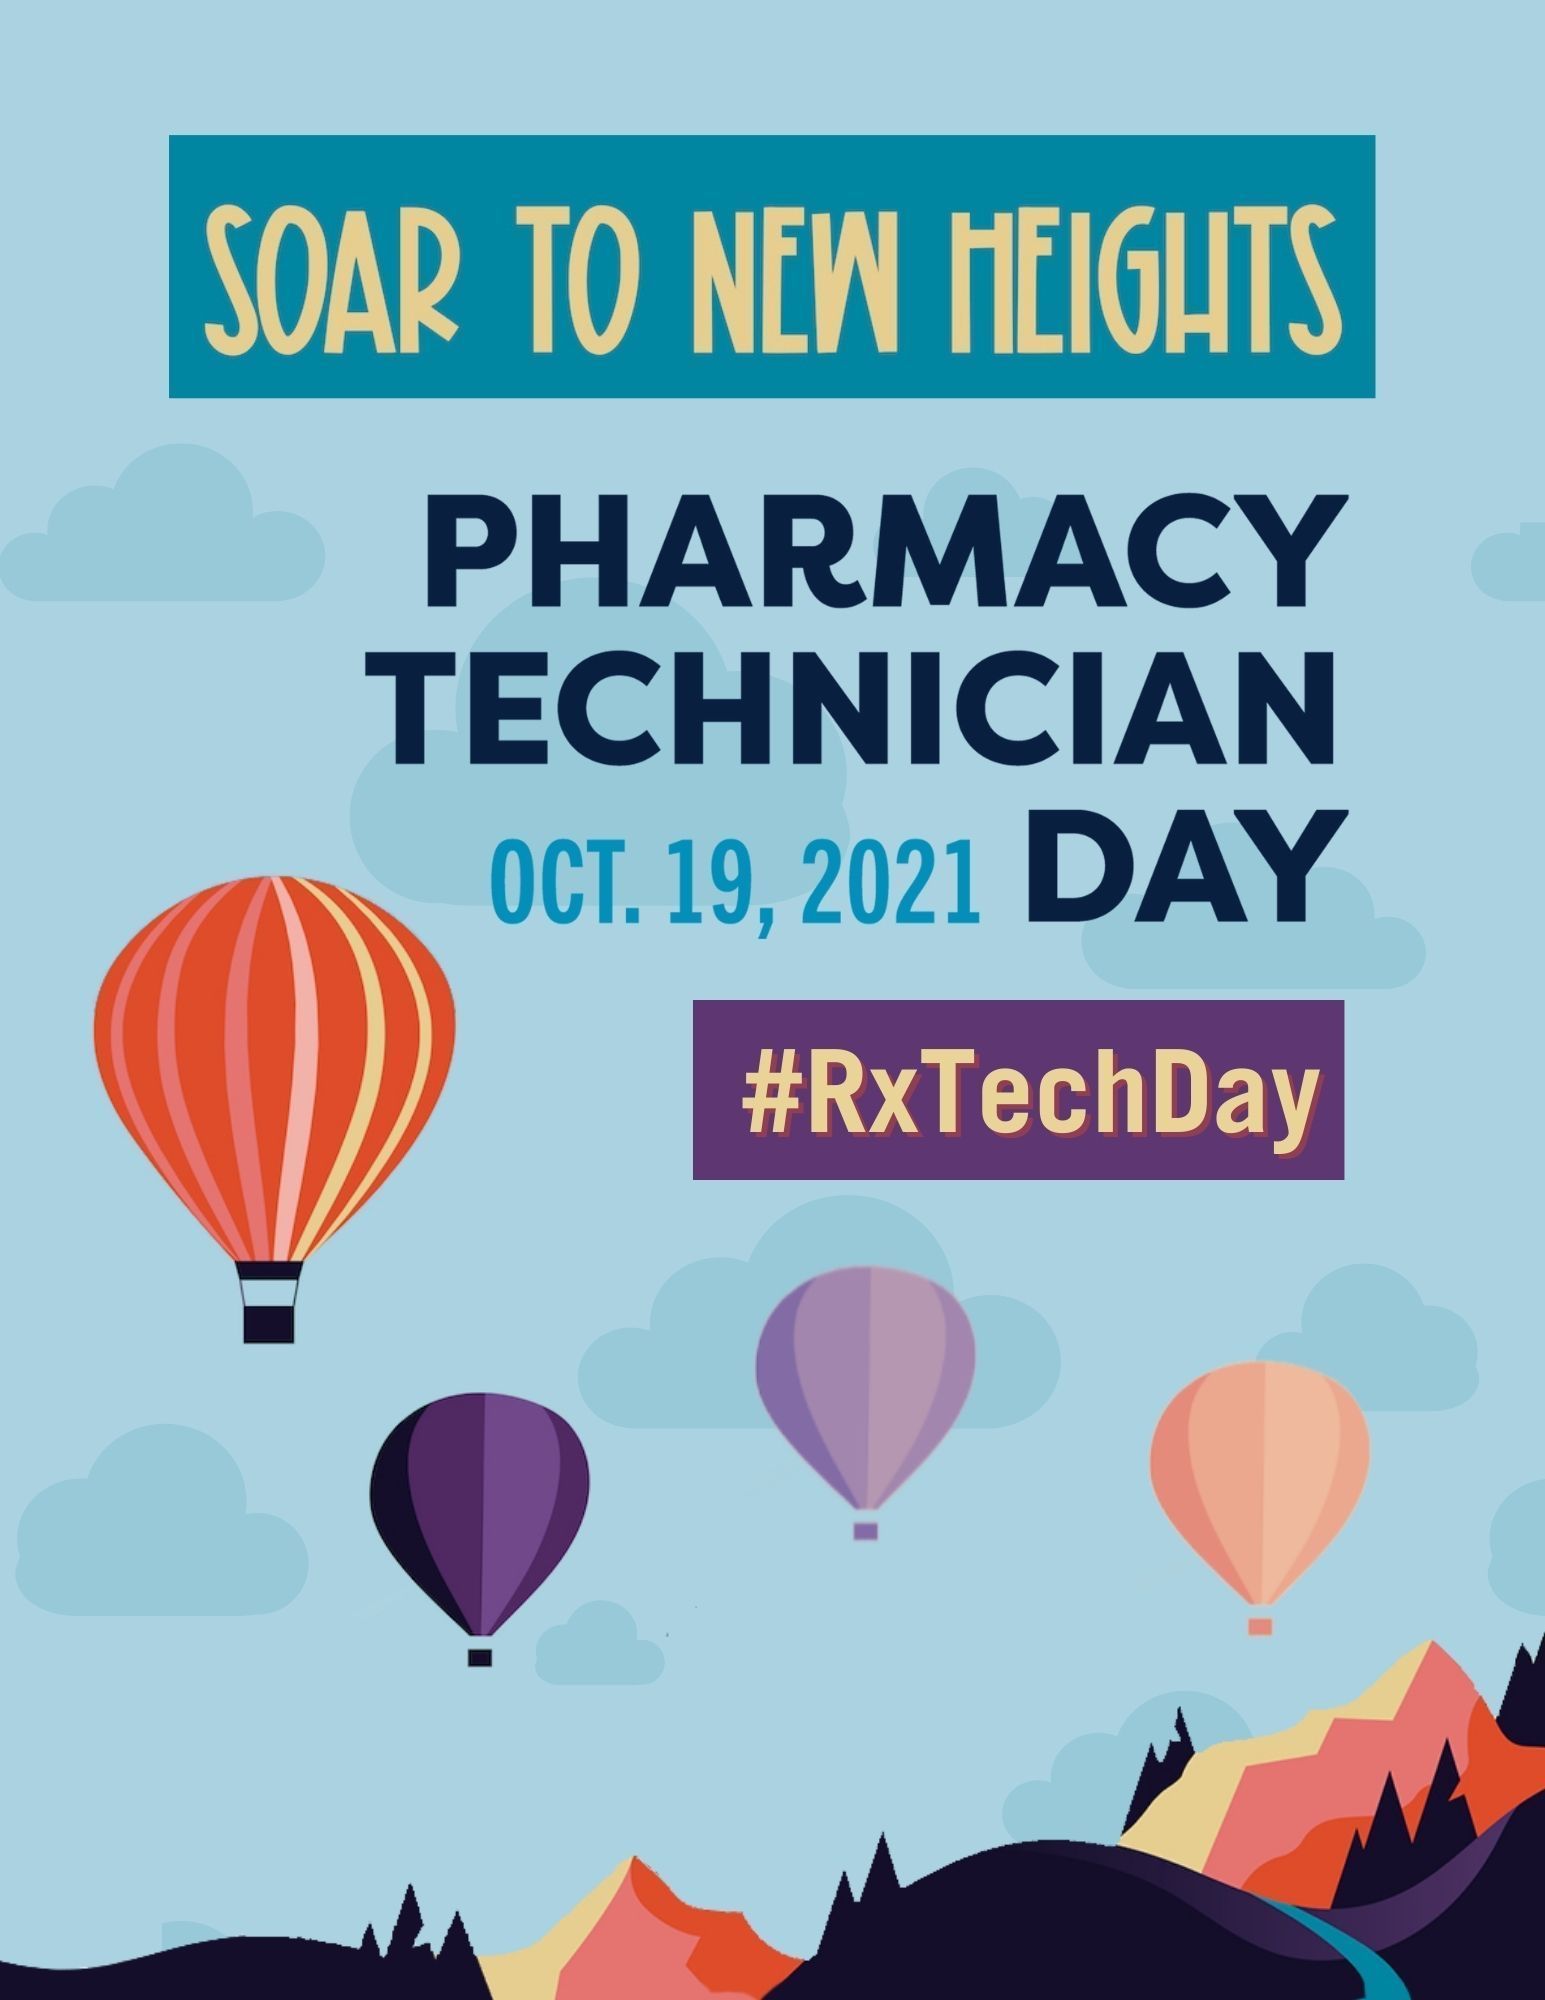 Tracey McLaren on Twitter "Happy Pharmacy Technician day to all